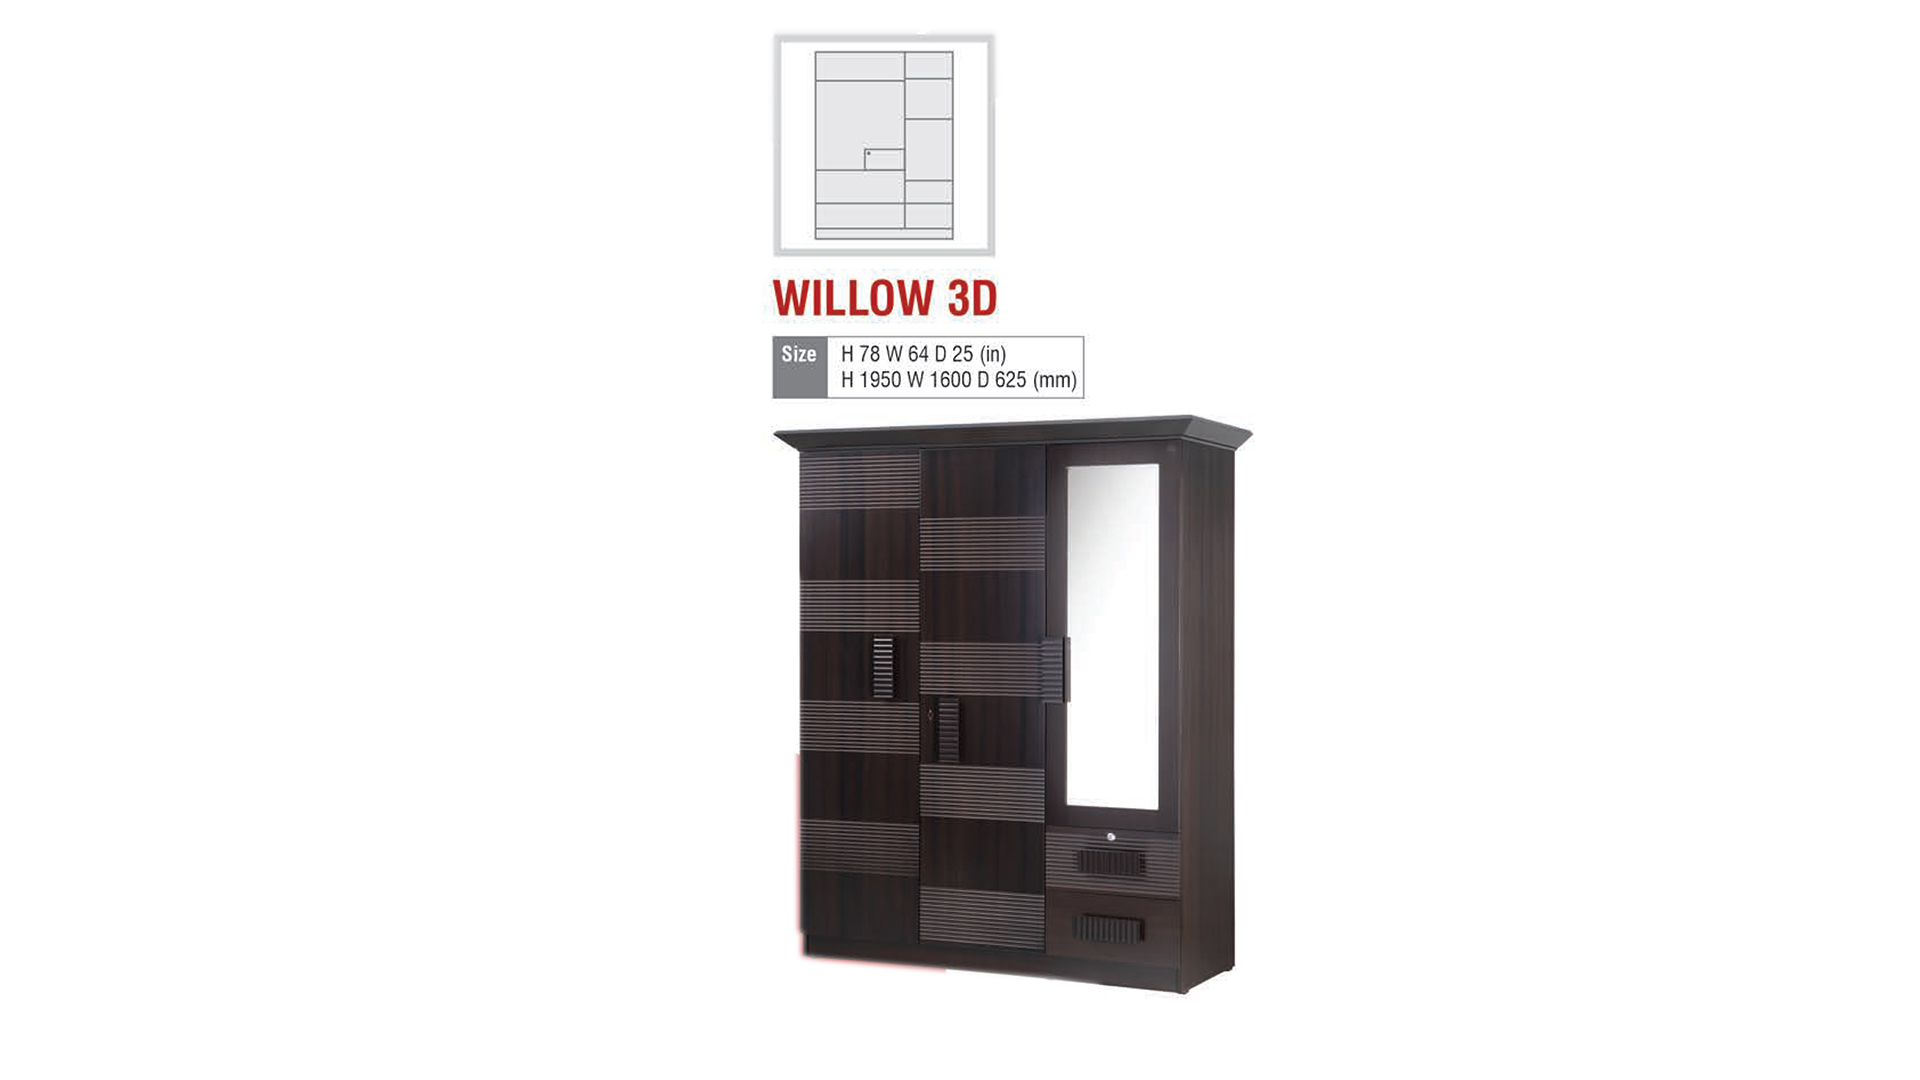 WILLOW 3D